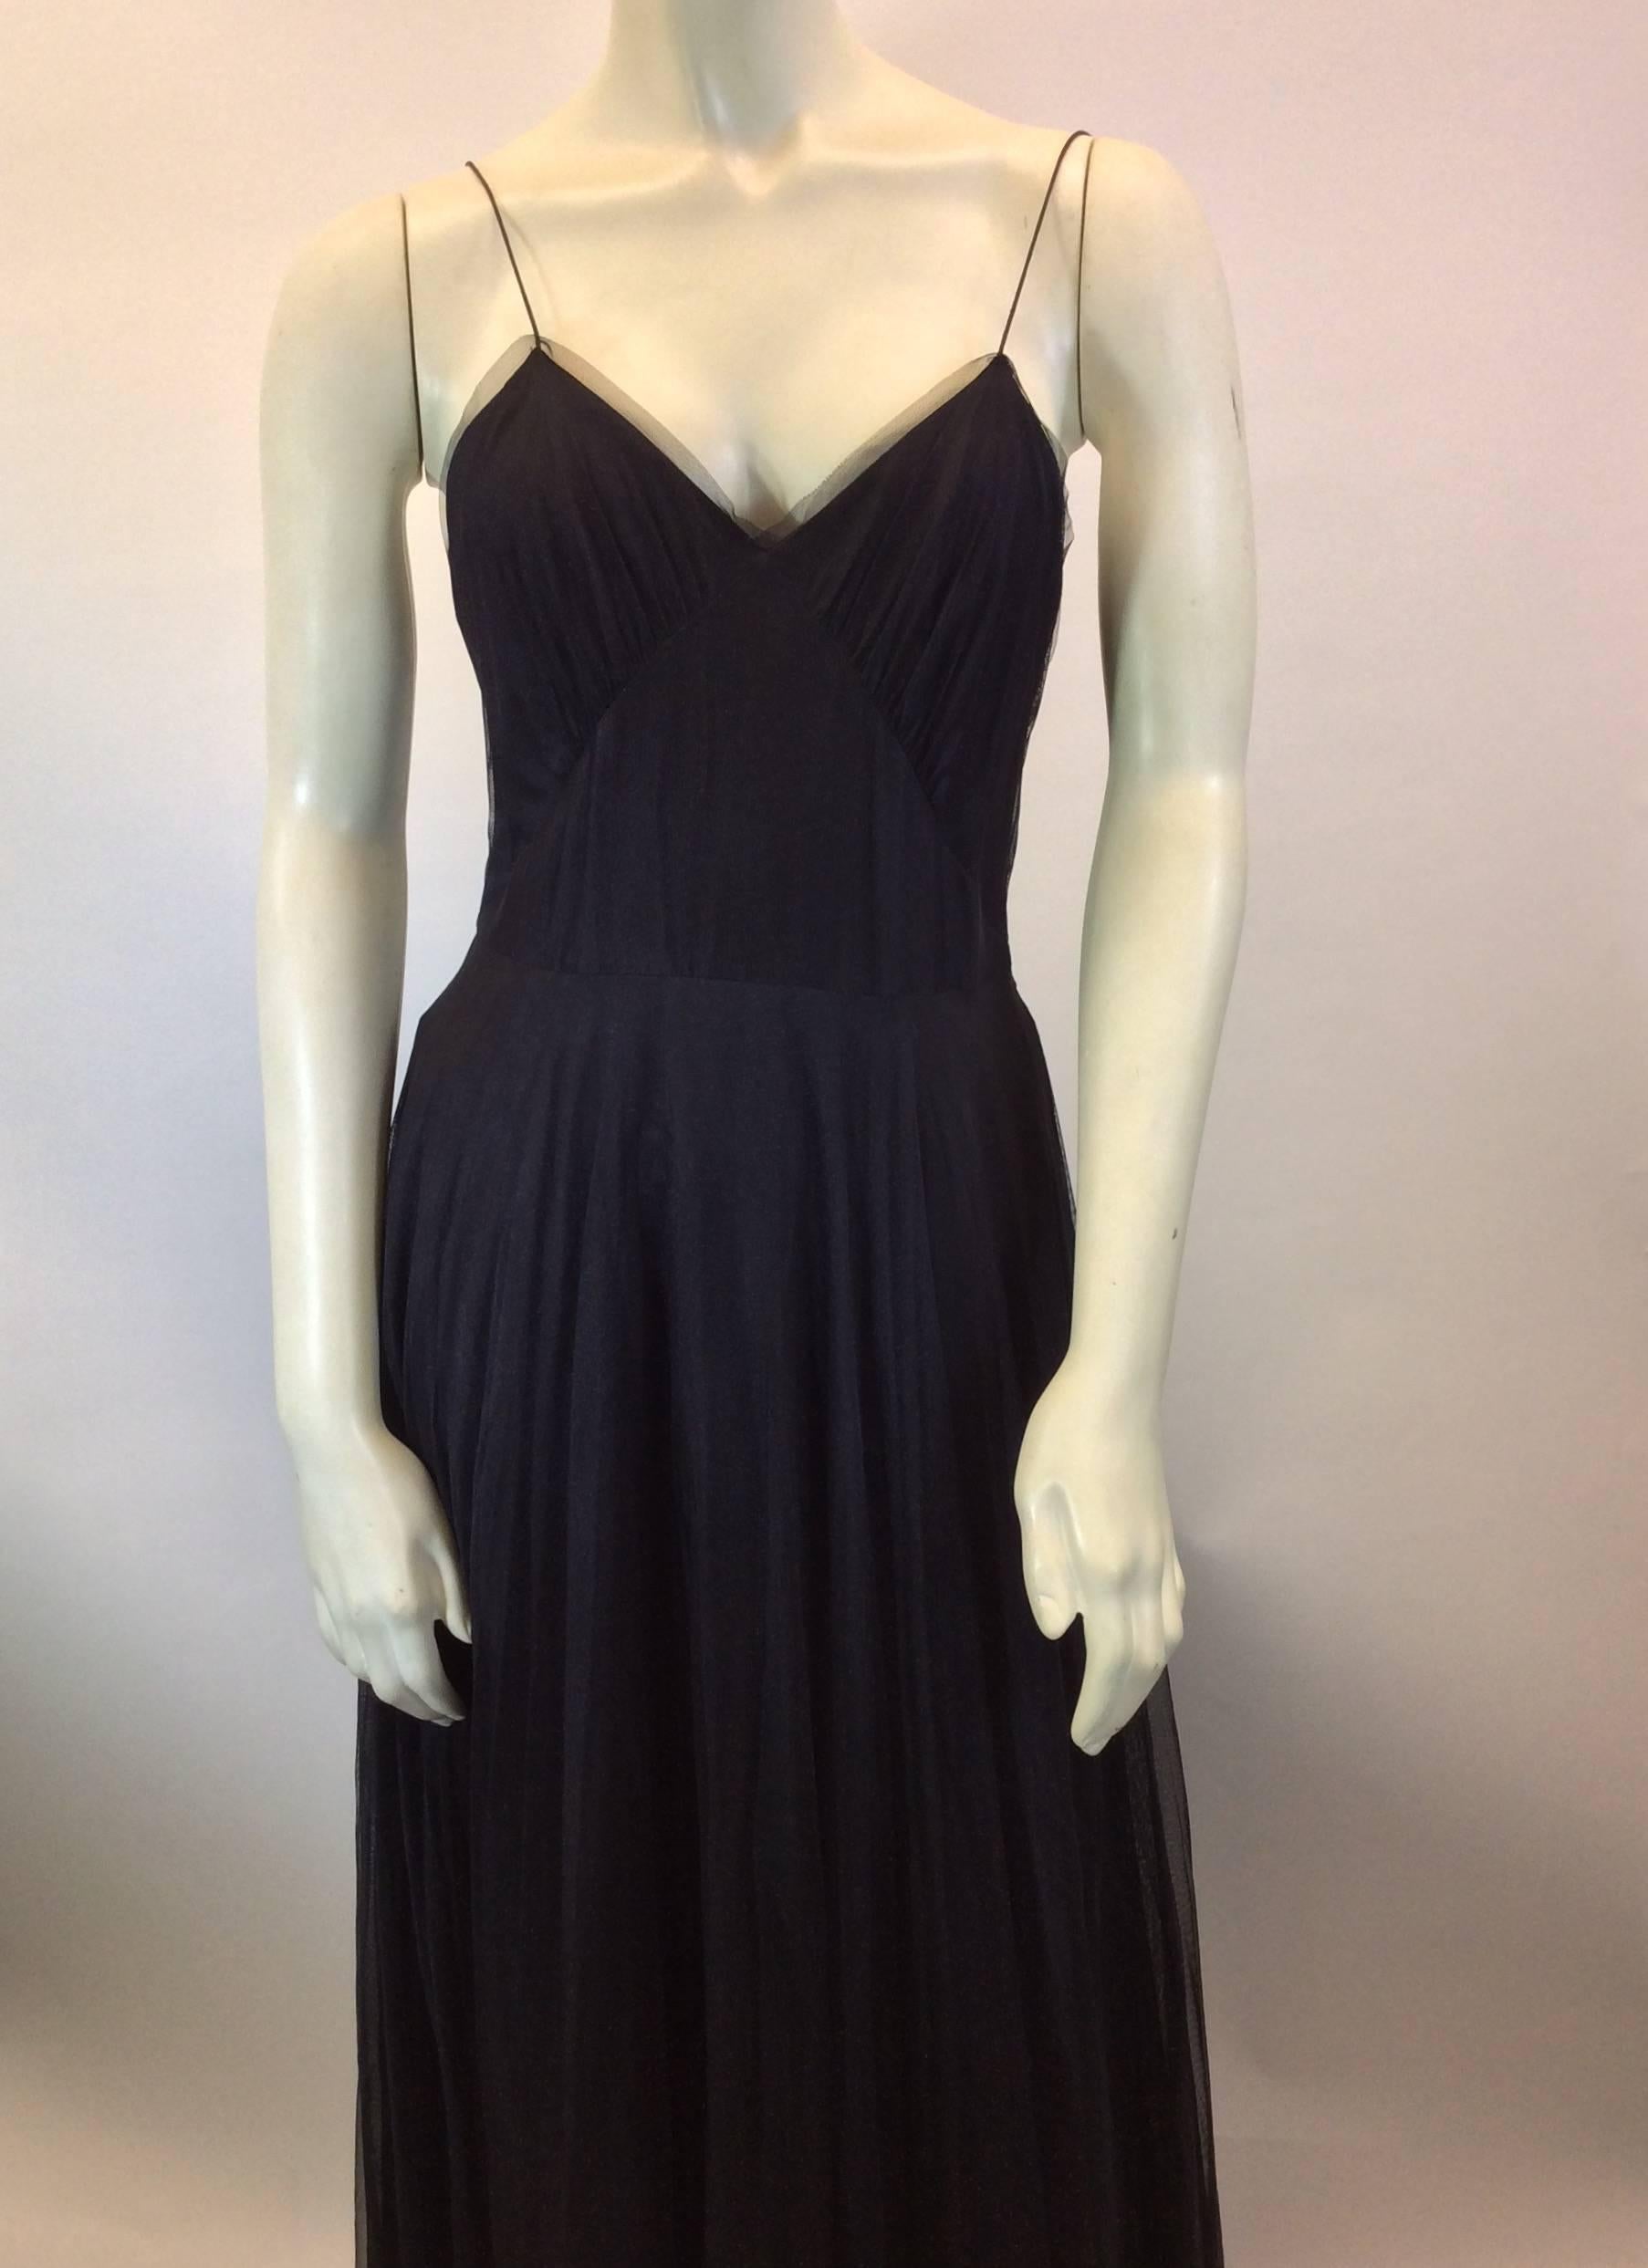 Black Tulle Evening Dress
Features buttoned back closure
Very thin shoulder straps
Tulle trim around bust
Size 38 (equates to US 6)
100% Polyamide shell, 60% Silk, 40% Viscose lining